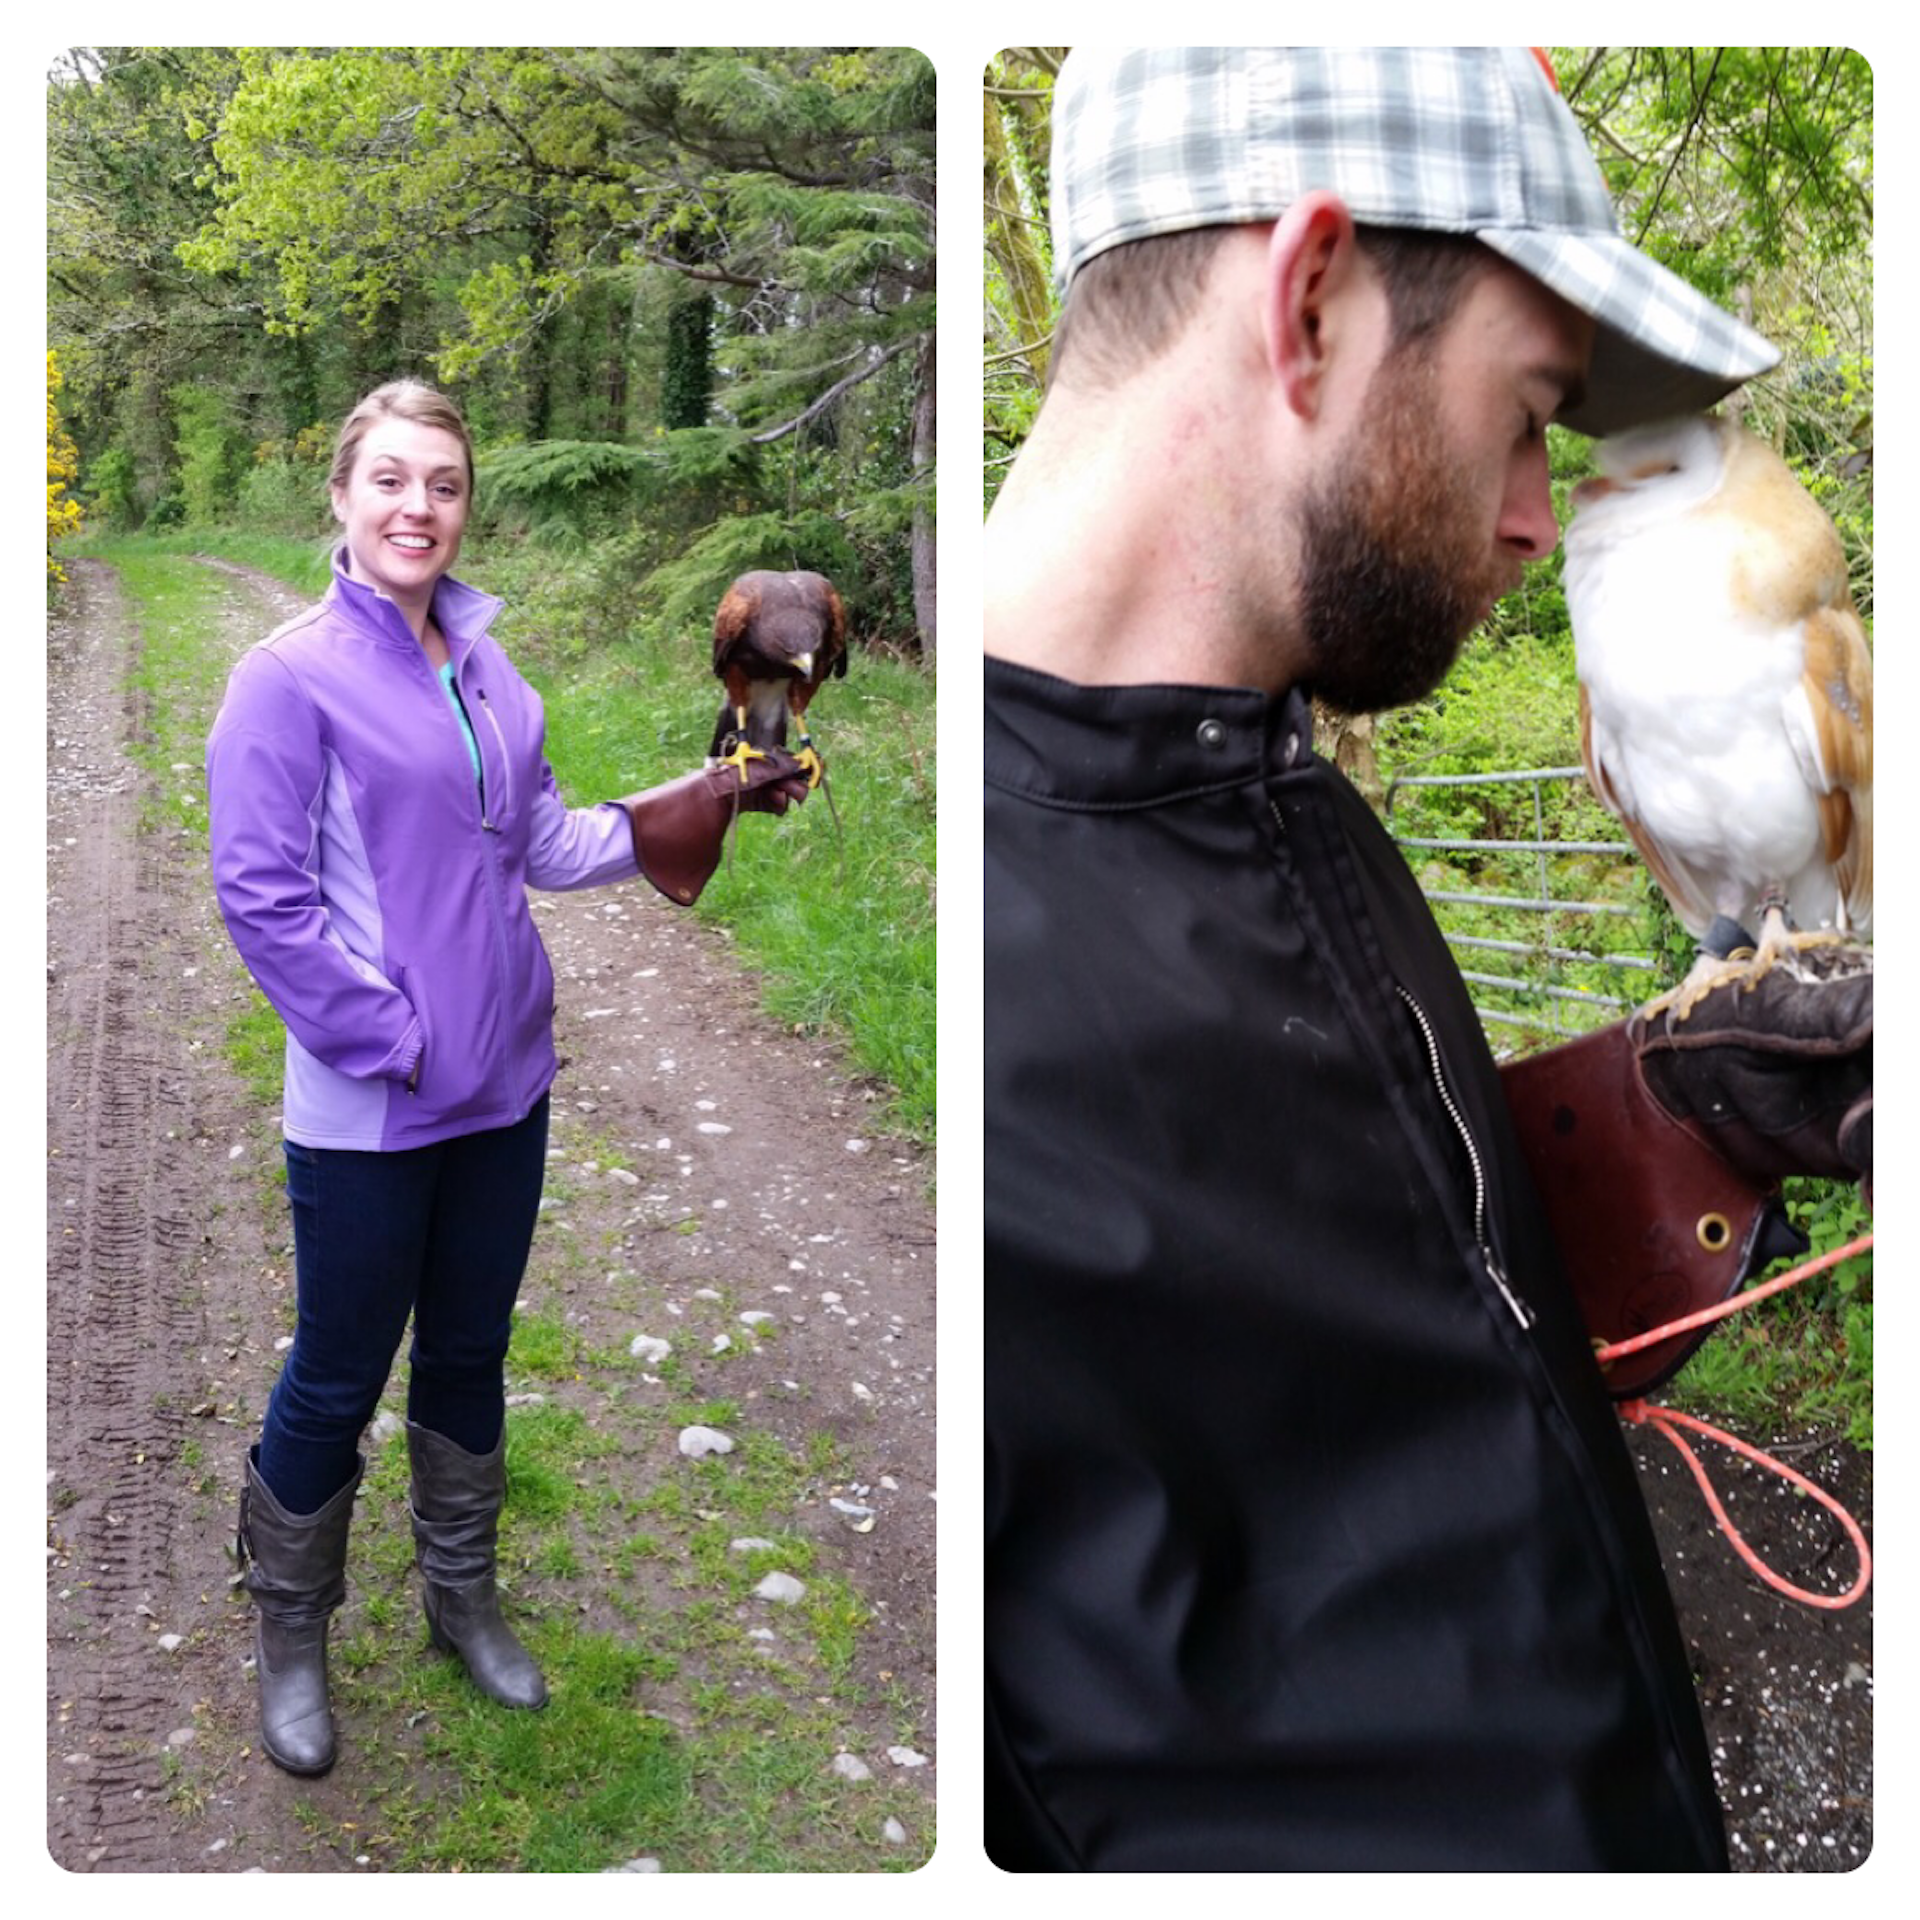 Two images: one with Amy standing on a dirt road holding her arm out, on her leather clad hand is a large falcon. The other image is of Amy's husband, him leaning his head towards a snowy white owl, who is leaning its head towards him with its eyes closed.